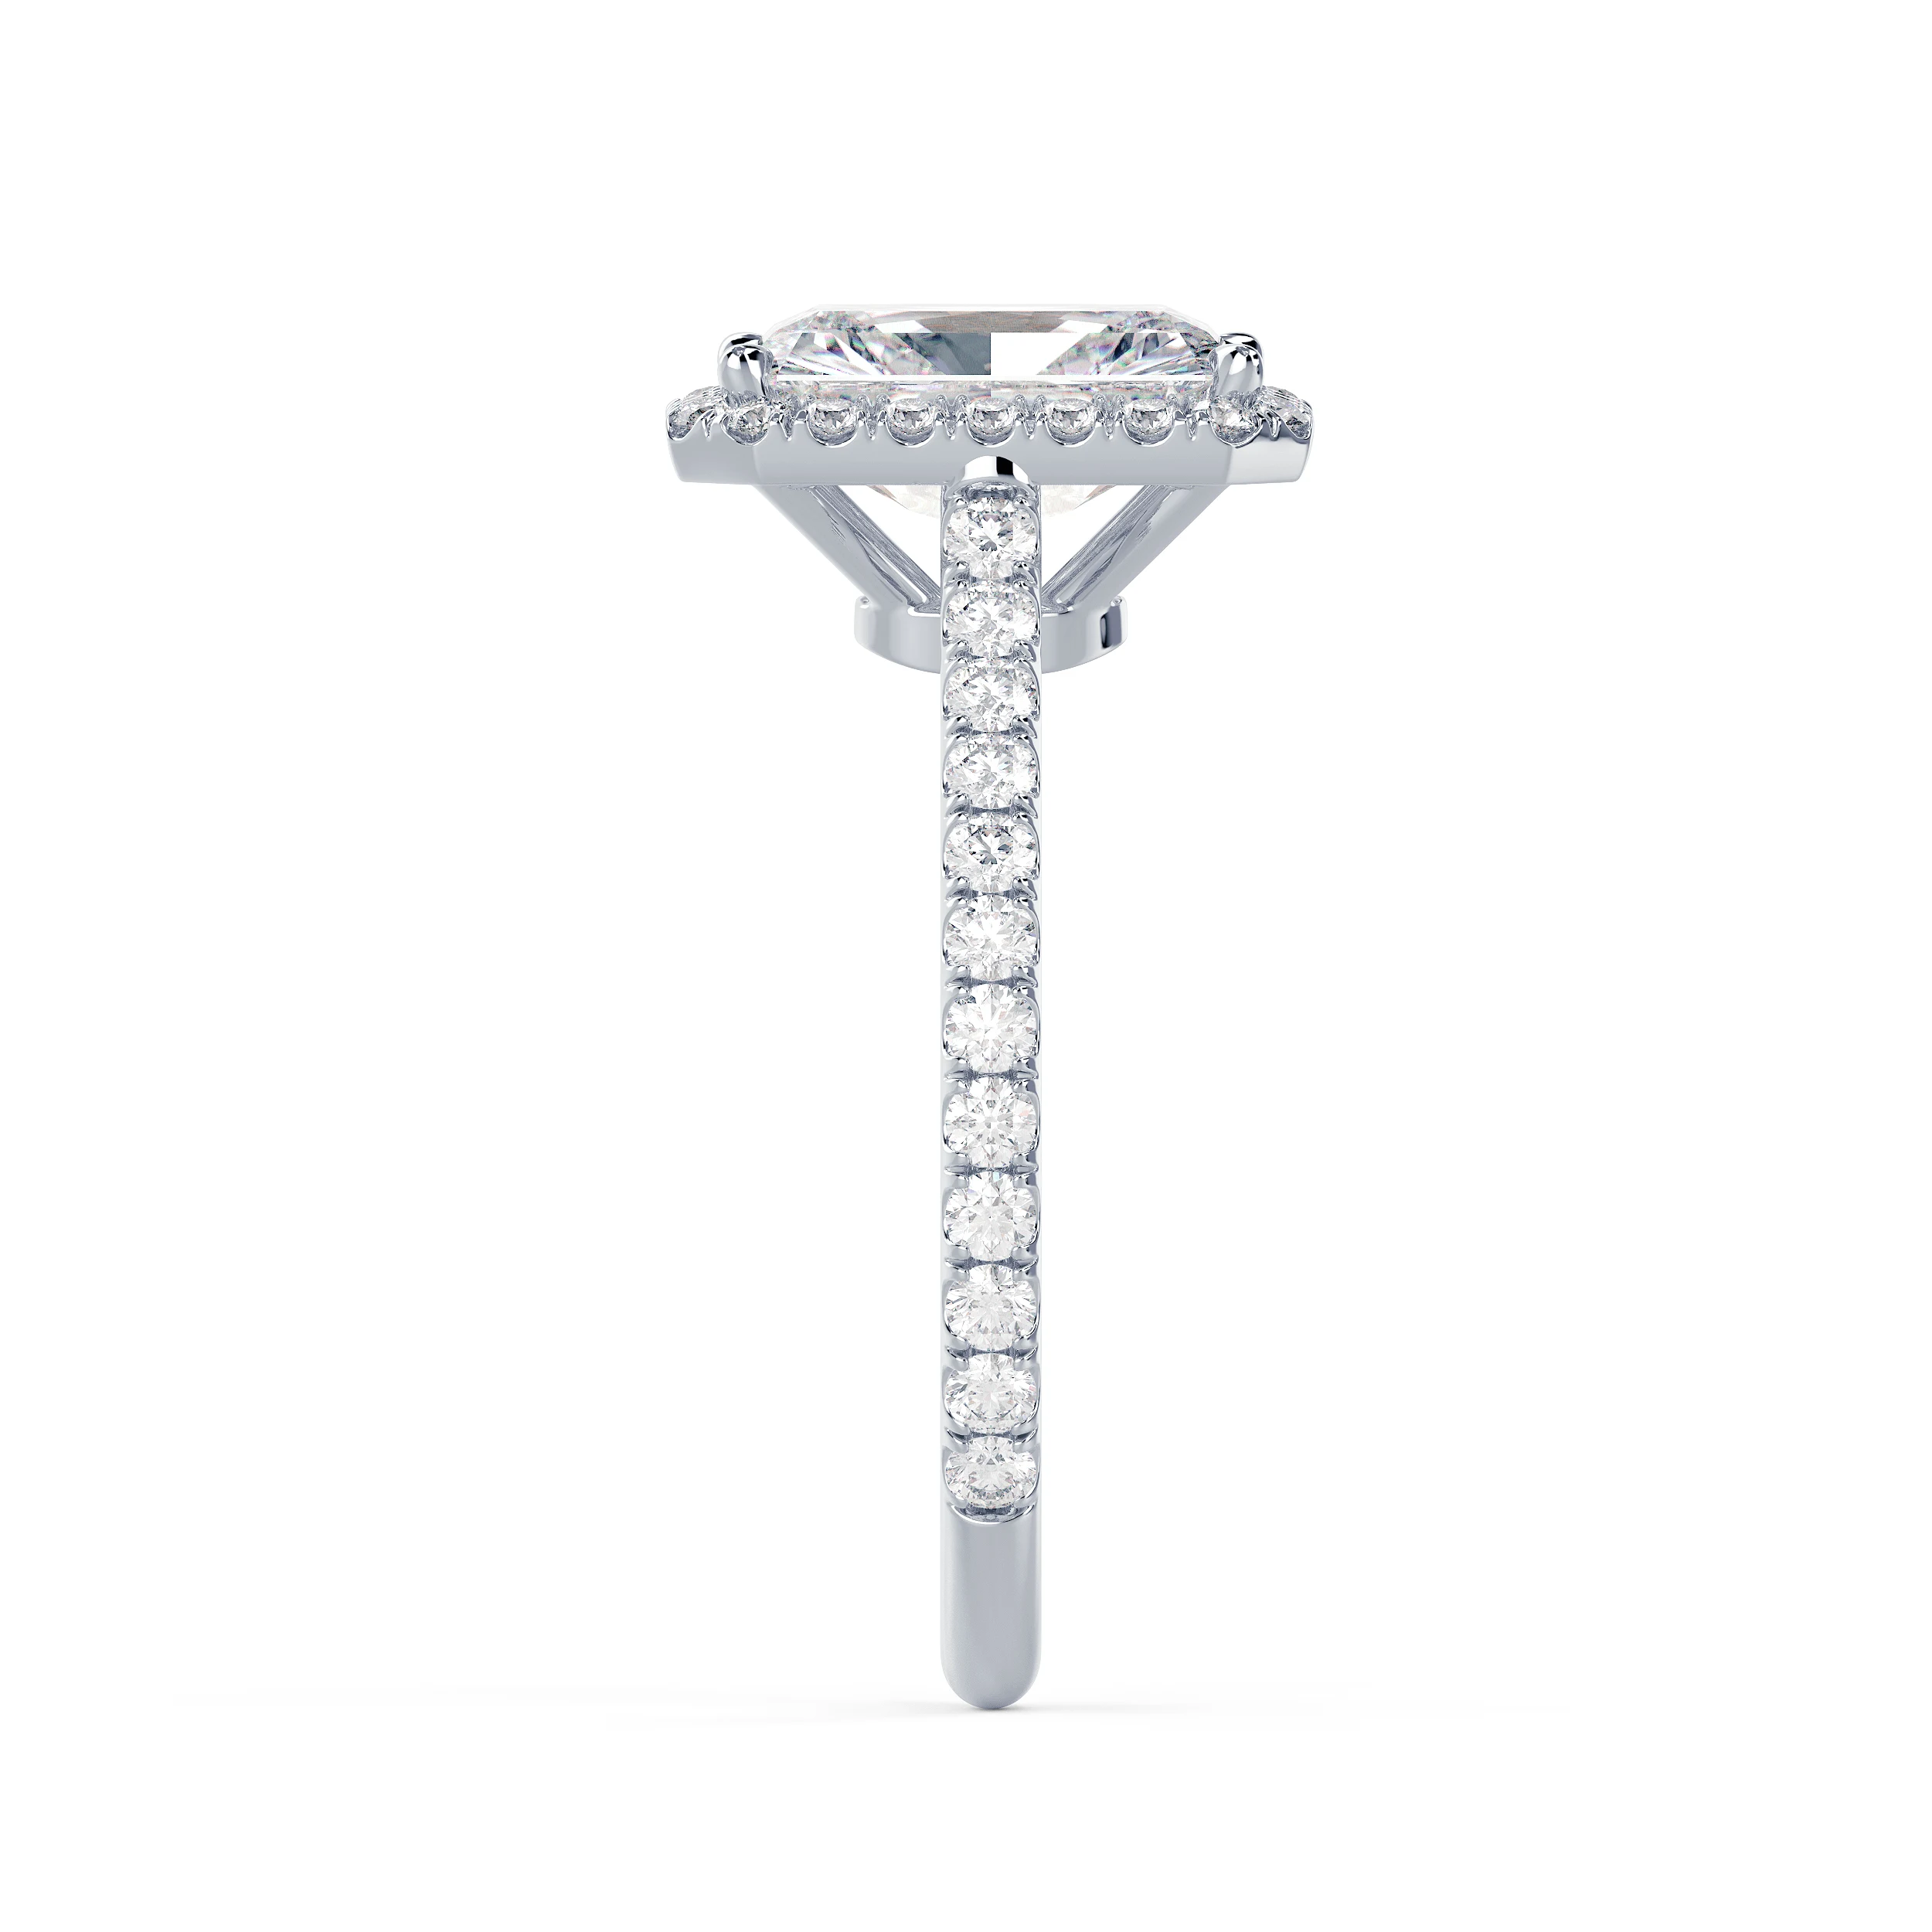 18k White Gold Radiant Halo Pavé Setting featuring 2.0 Carat Lab Diamonds (Side View)